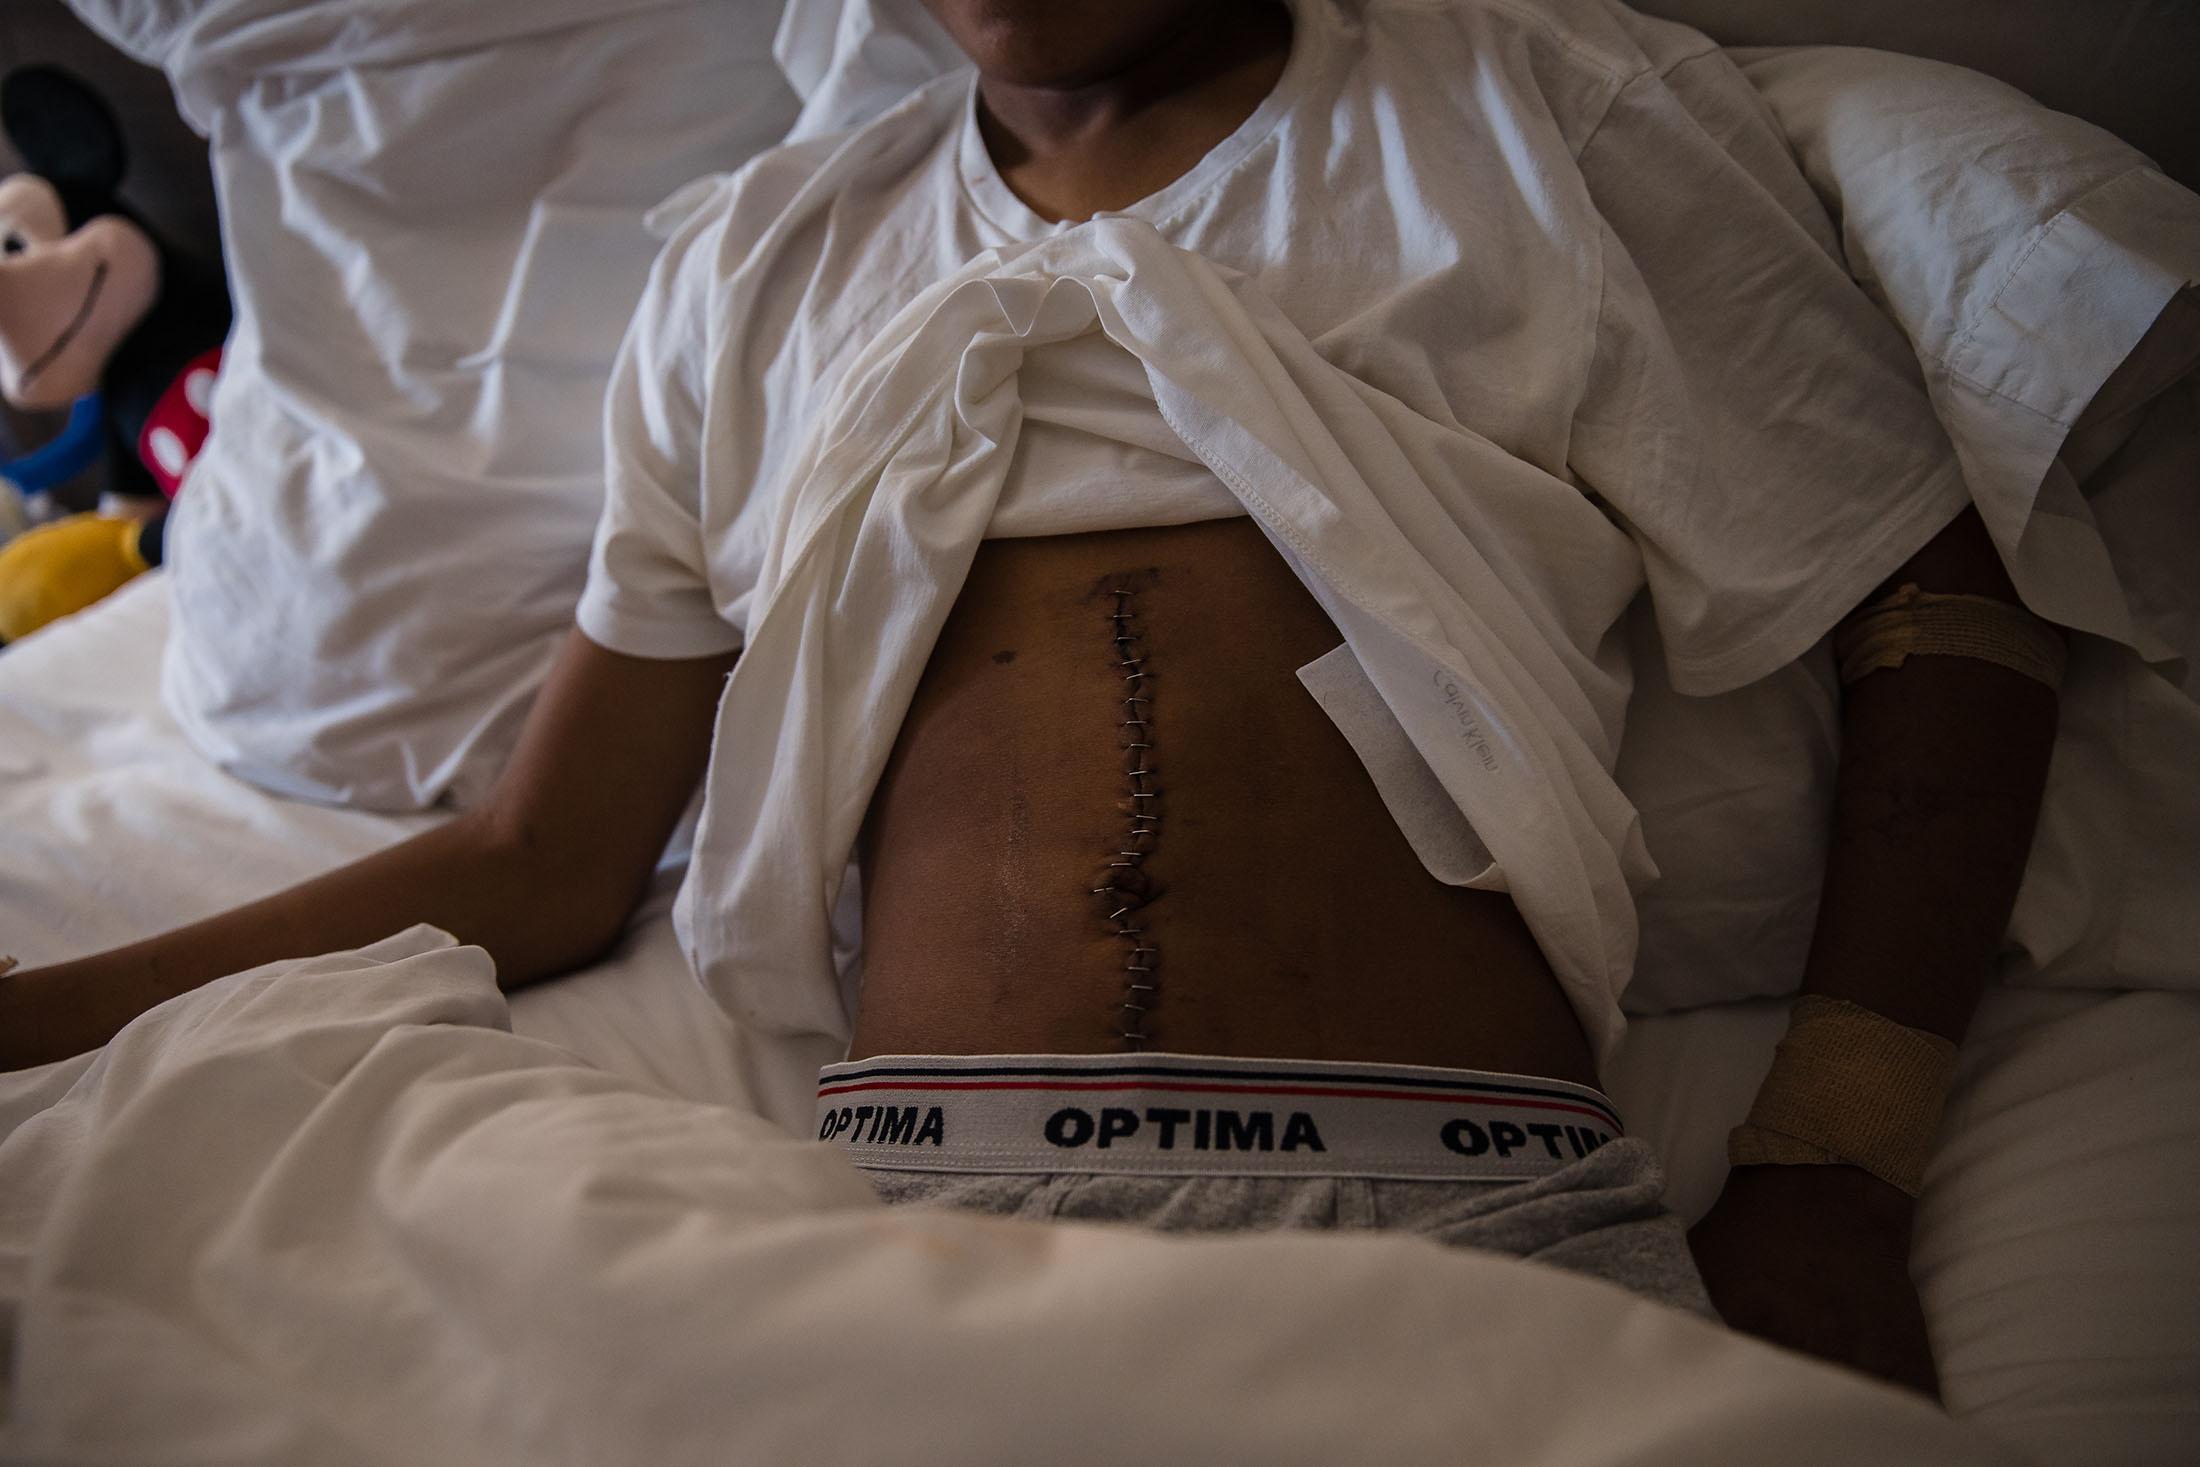 Jose Eduardo Martinez Gonzalez shows his stomach with surgical staples after being hospitalized.